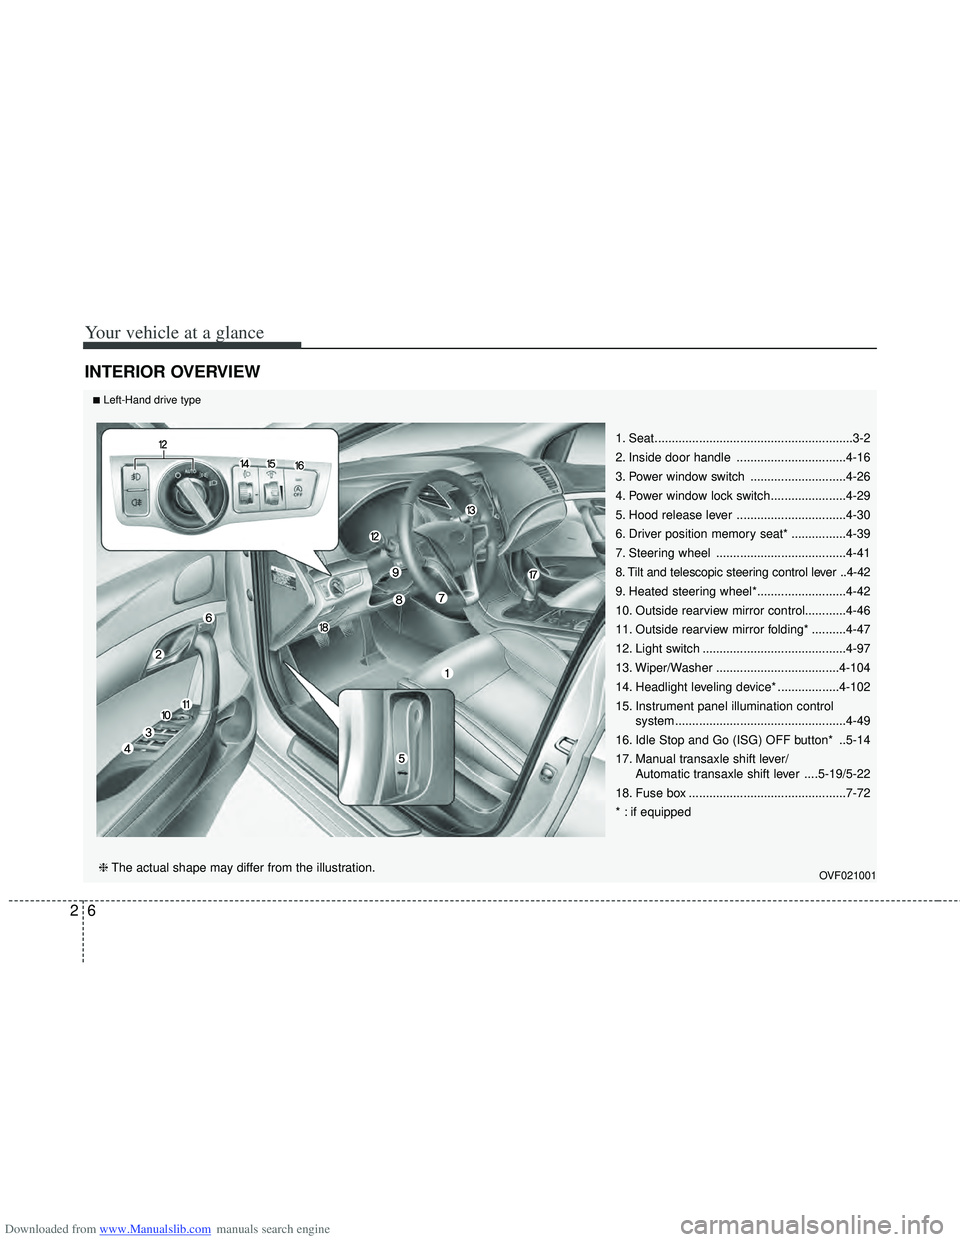 HYUNDAI I40 2018 User Guide Downloaded from www.Manualslib.com manuals search engine Your vehicle at a glance
62
INTERIOR OVERVIEW
1. Seat..........................................................3-2
2. Inside door handle ......